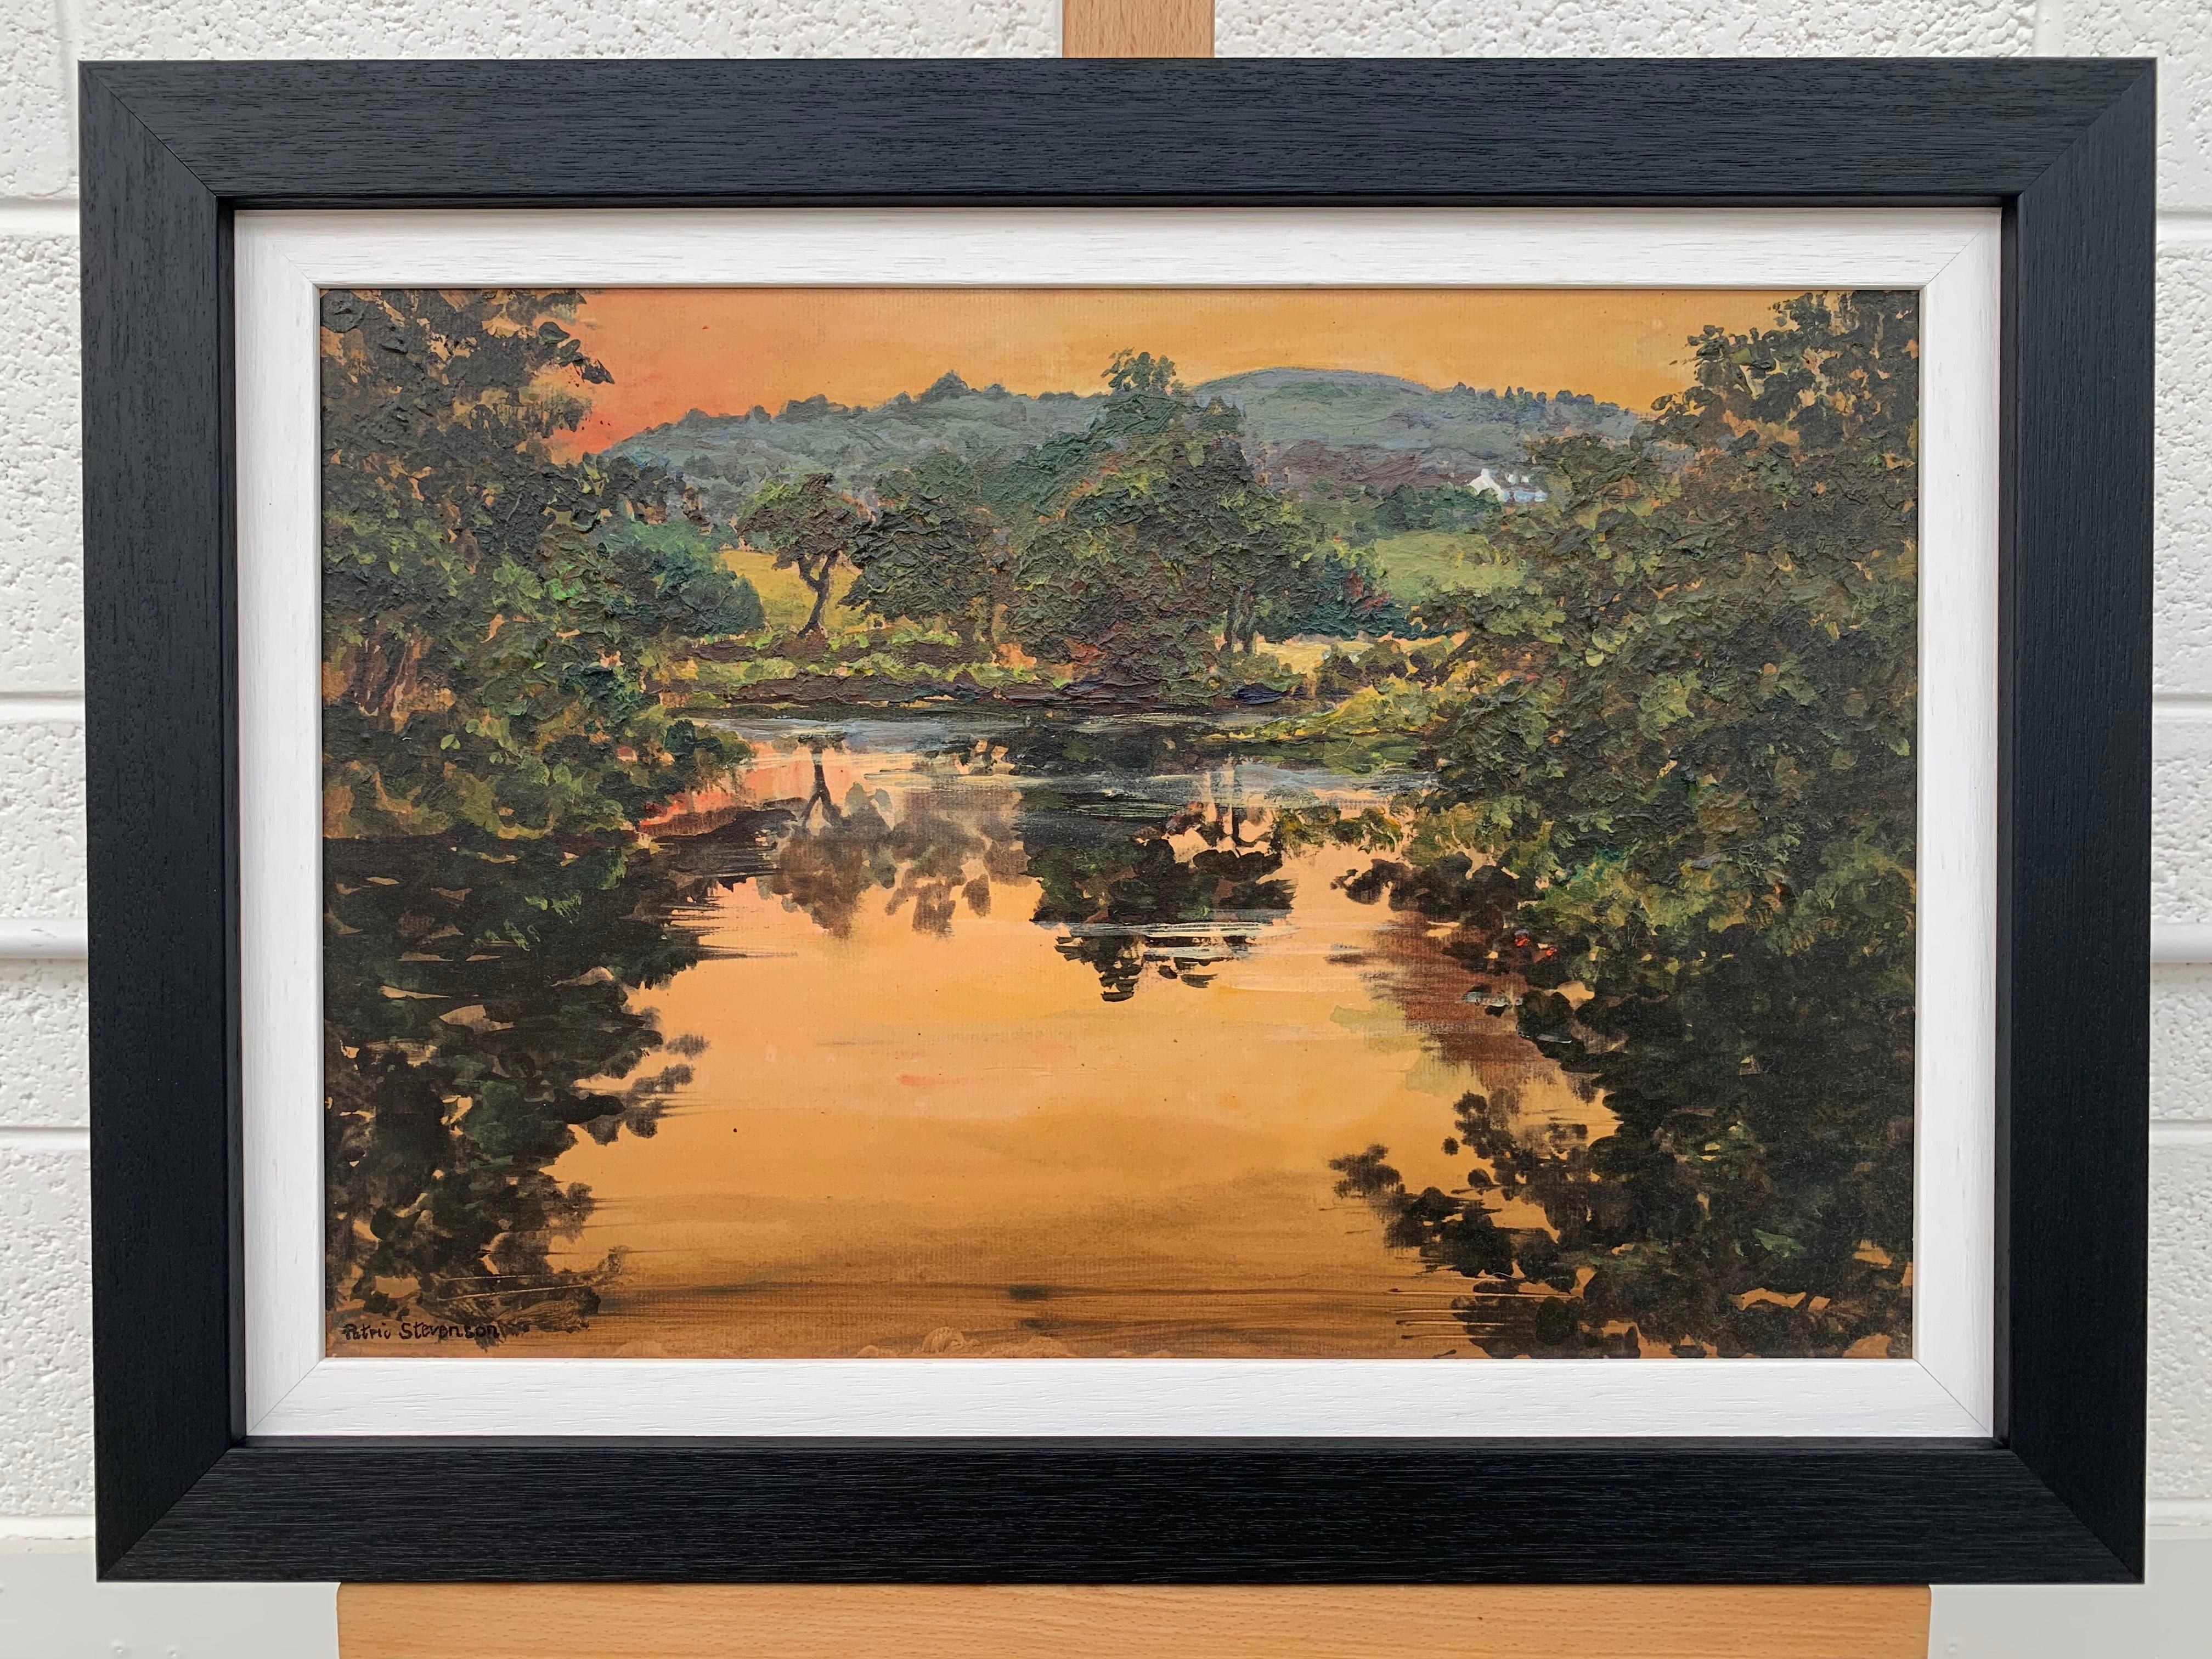 Original Painting of the River Lennon at Sunset, near Remelton, County Donegal in Ireland by British Artist. 

Art measures 18.5 x 12.5 inches
Frame measures 23.5 x 17.5 inches

Patric Stevenson was born in Wadhurst, Sussex. He was educated at